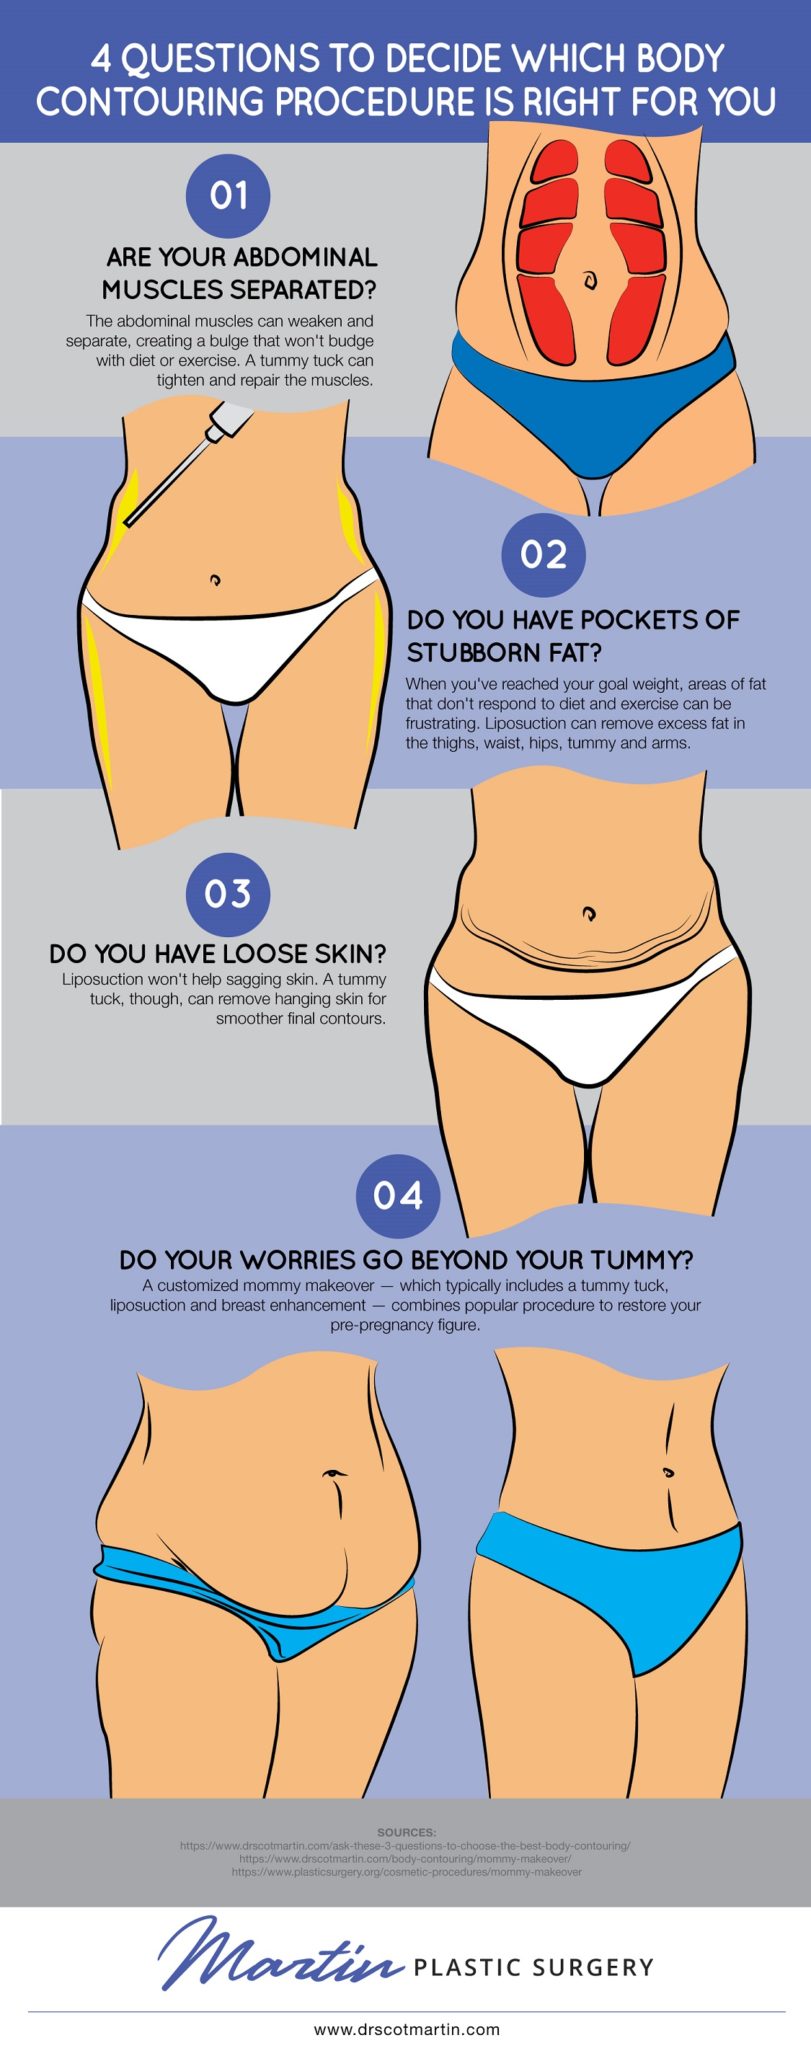 4 Questions to Decide Which Body Contouring Procedure Is Right for You [Infographic] img 1